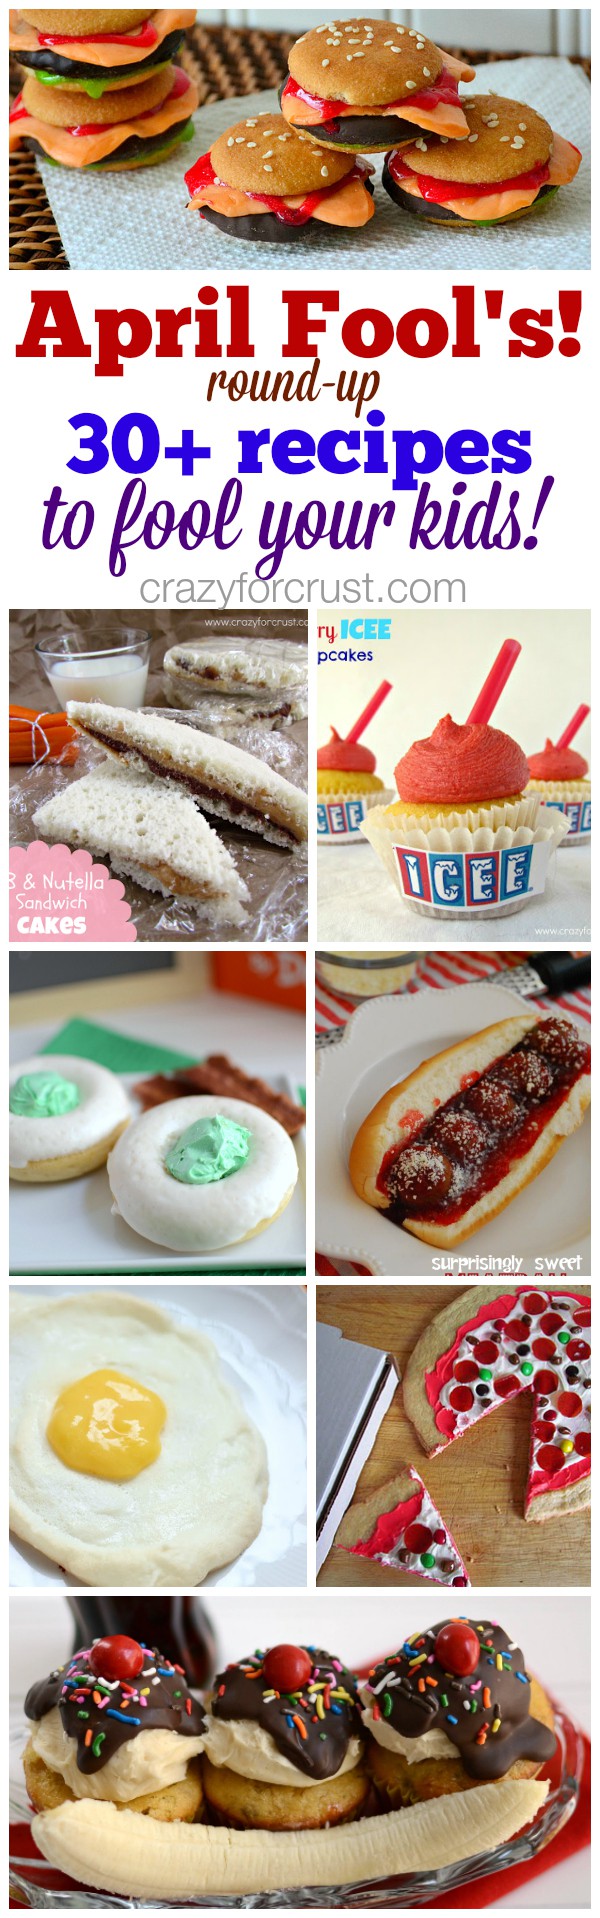 Collage of photos showing April Fool's Day recipes to fool your kids 